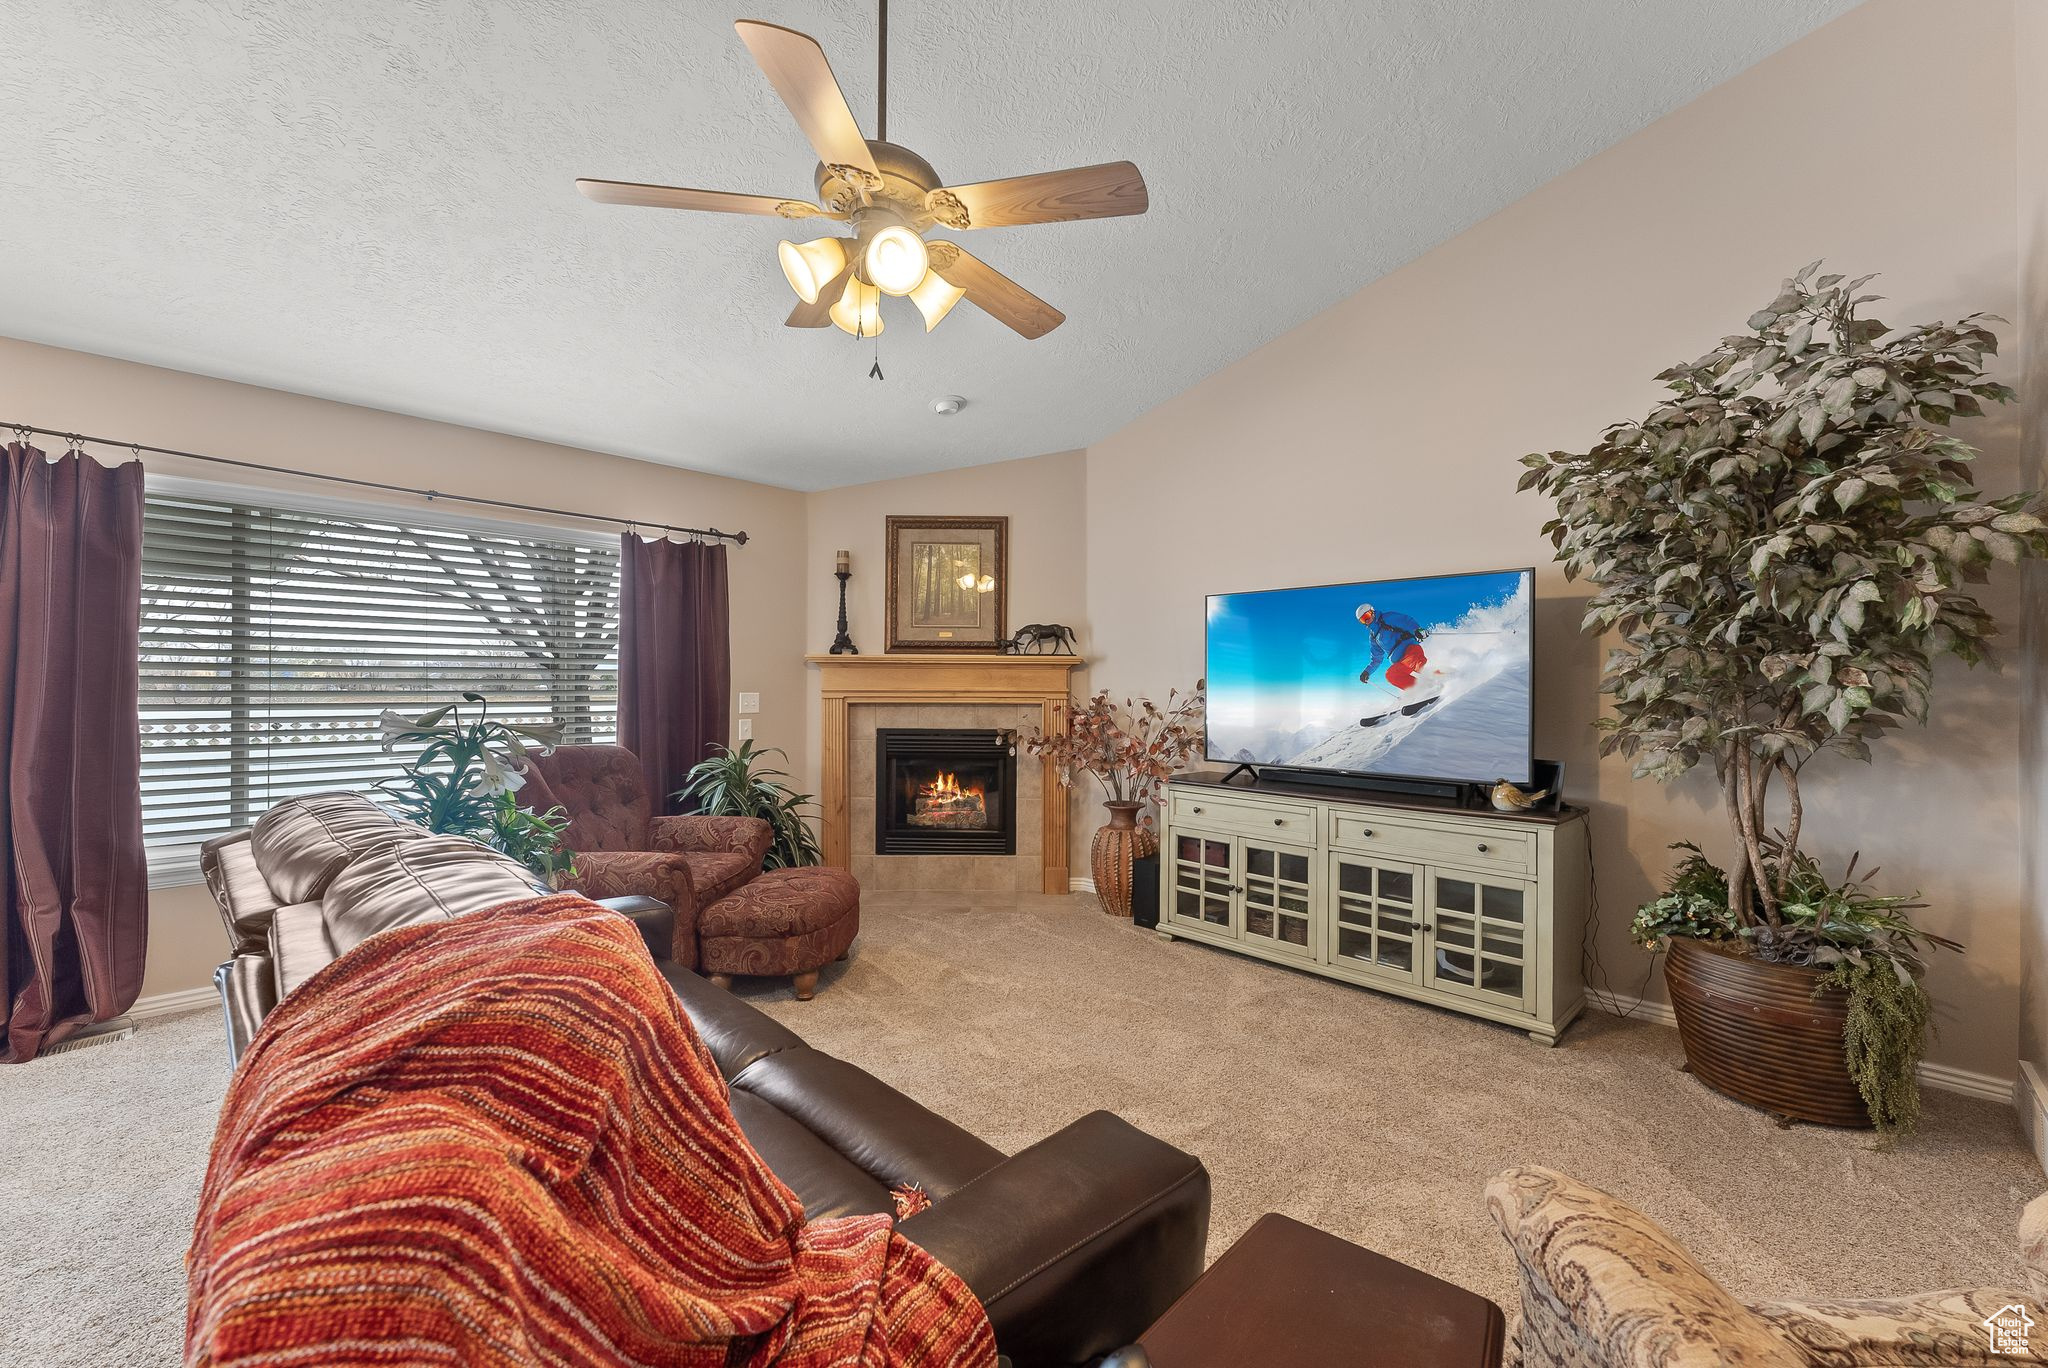 Living room featuring ceiling fan, lofted ceiling, a tile fireplace, and light colored carpet